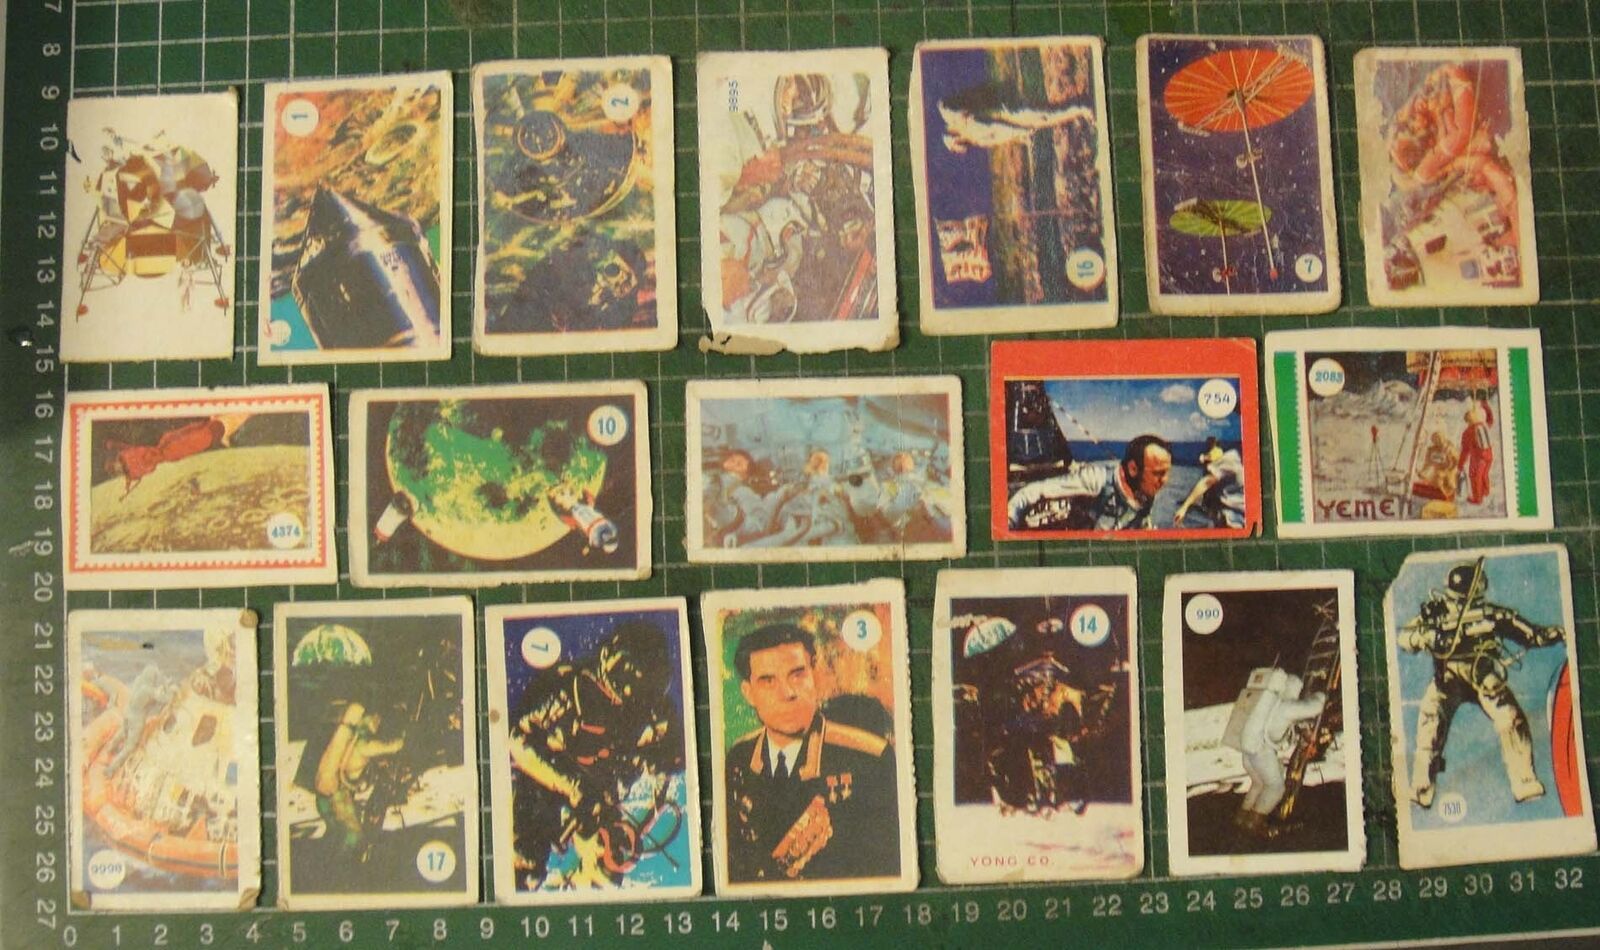 BS1-45) 1970's Malaysia Vintage Trading Cards~APOLLO II Space Astronaut Rocket